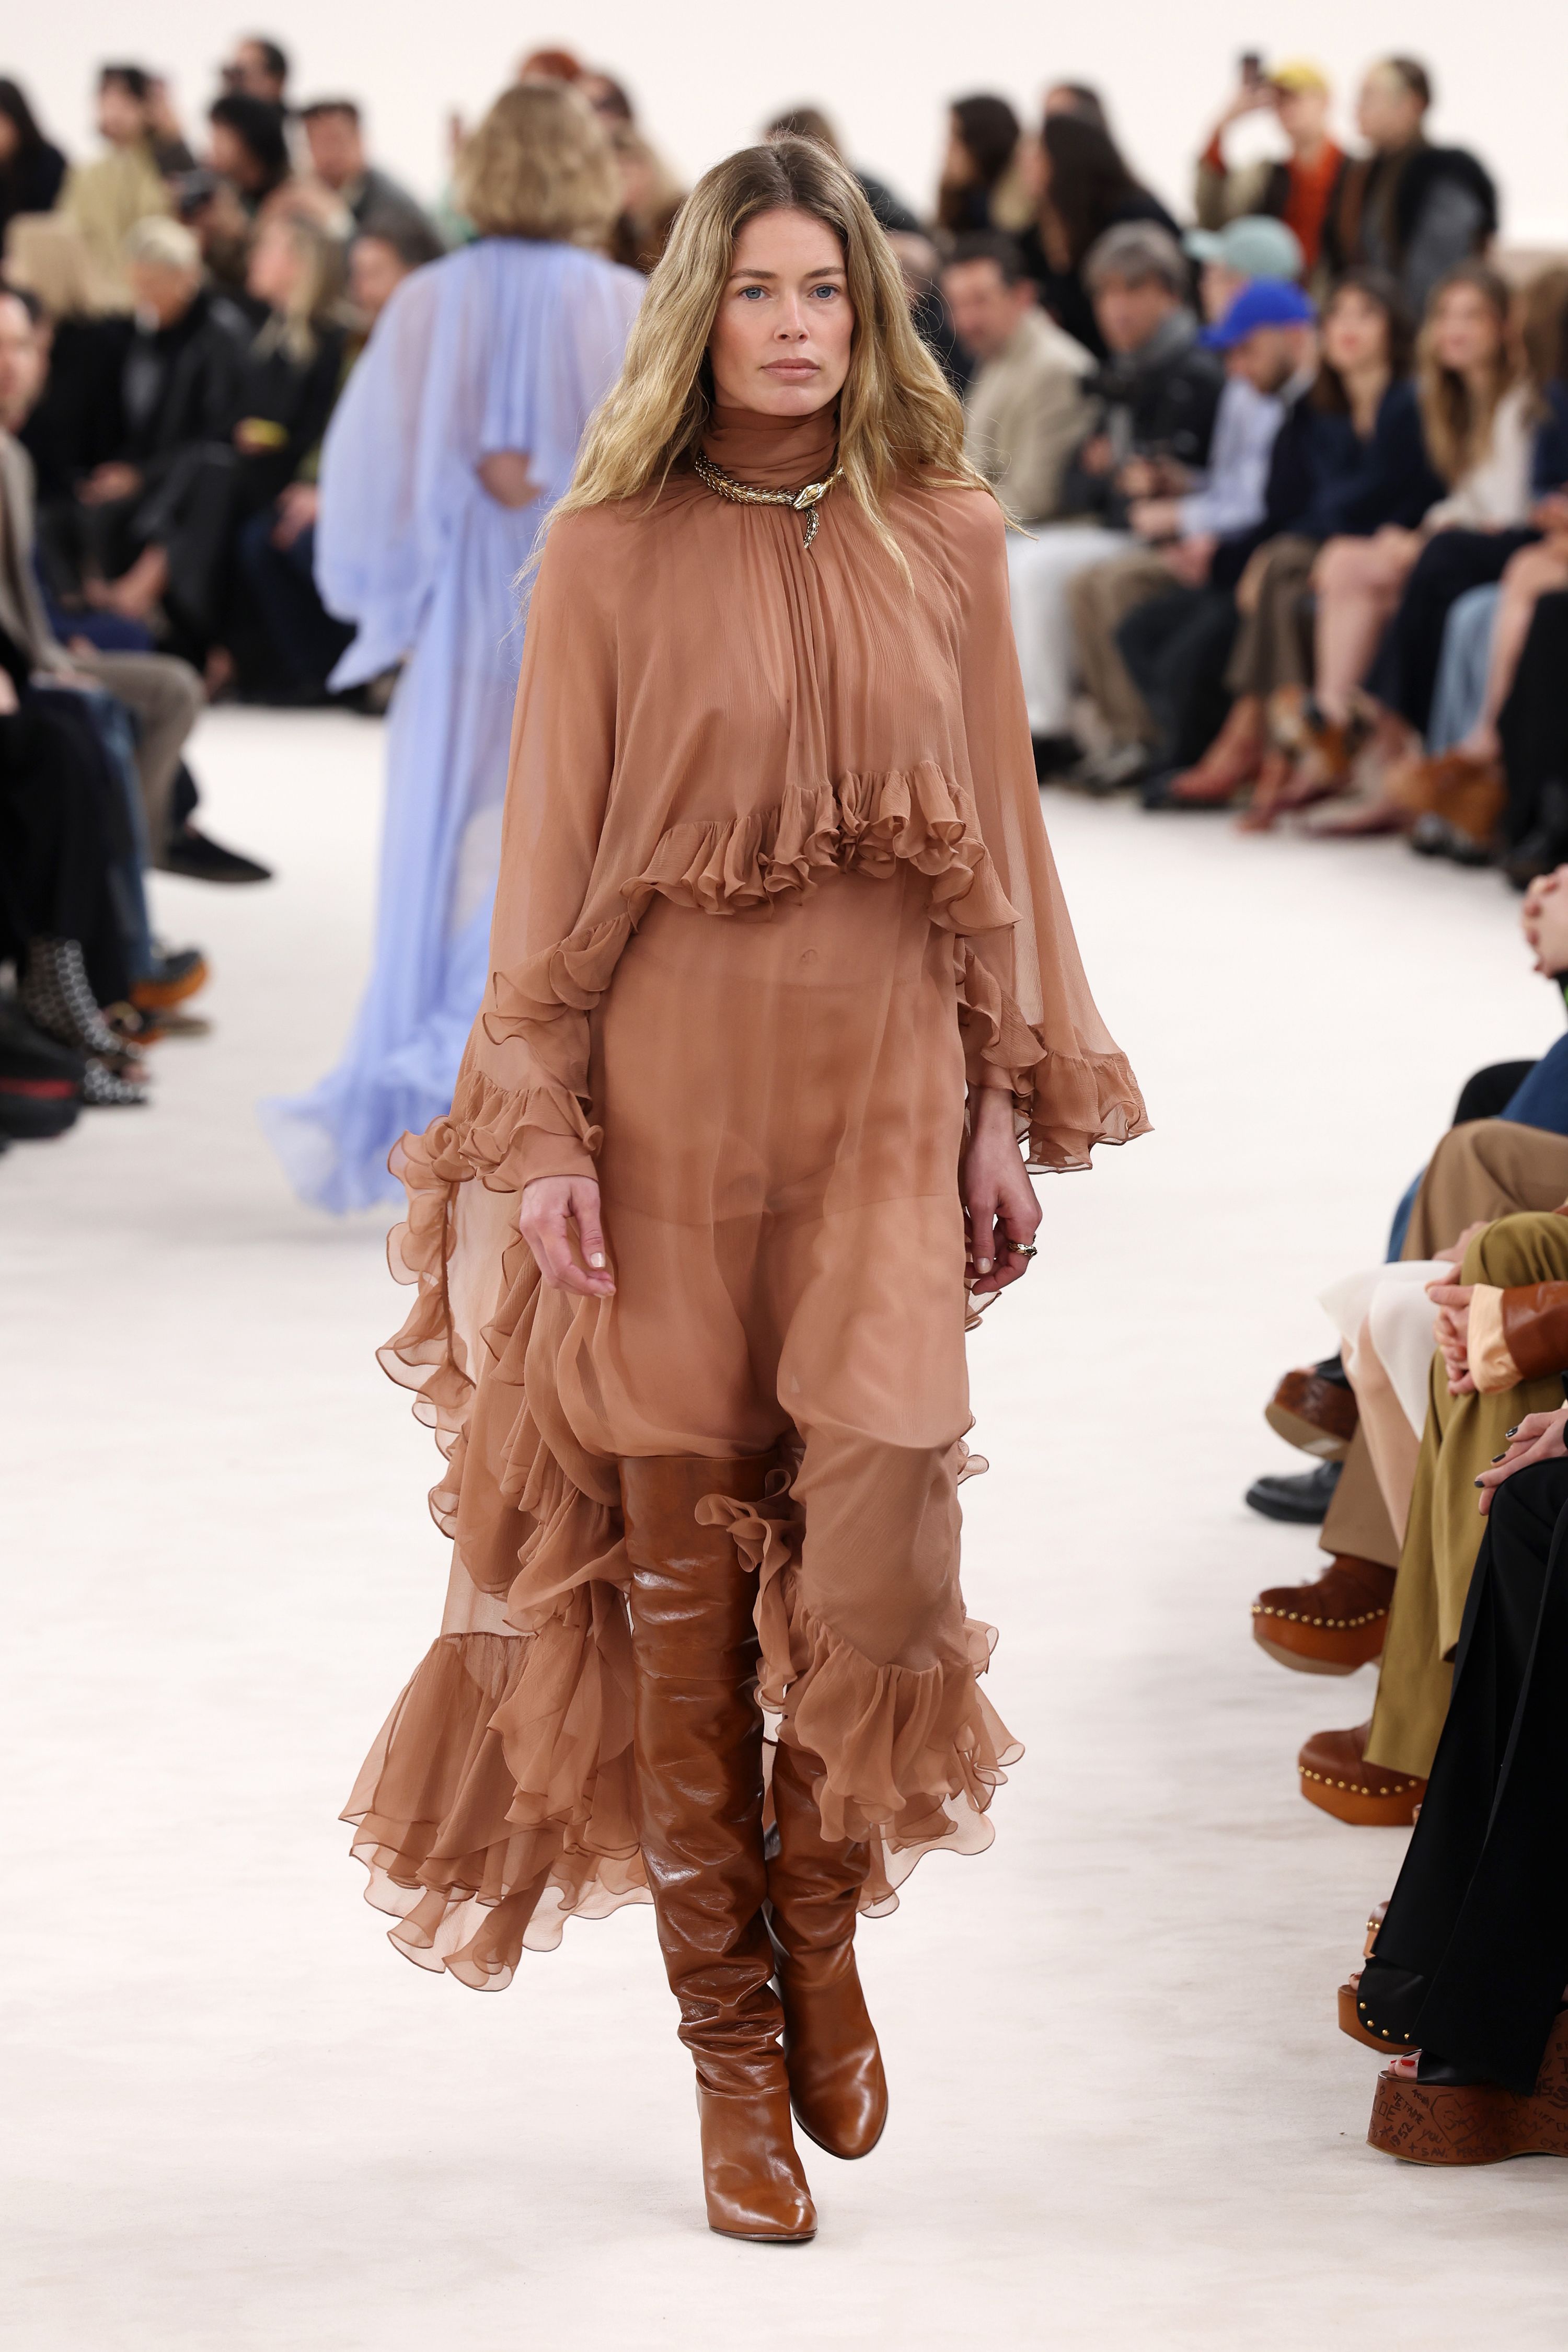 Doutzen Kroes was spotted on the runway for Chemena Kamali's debut Chloé show.